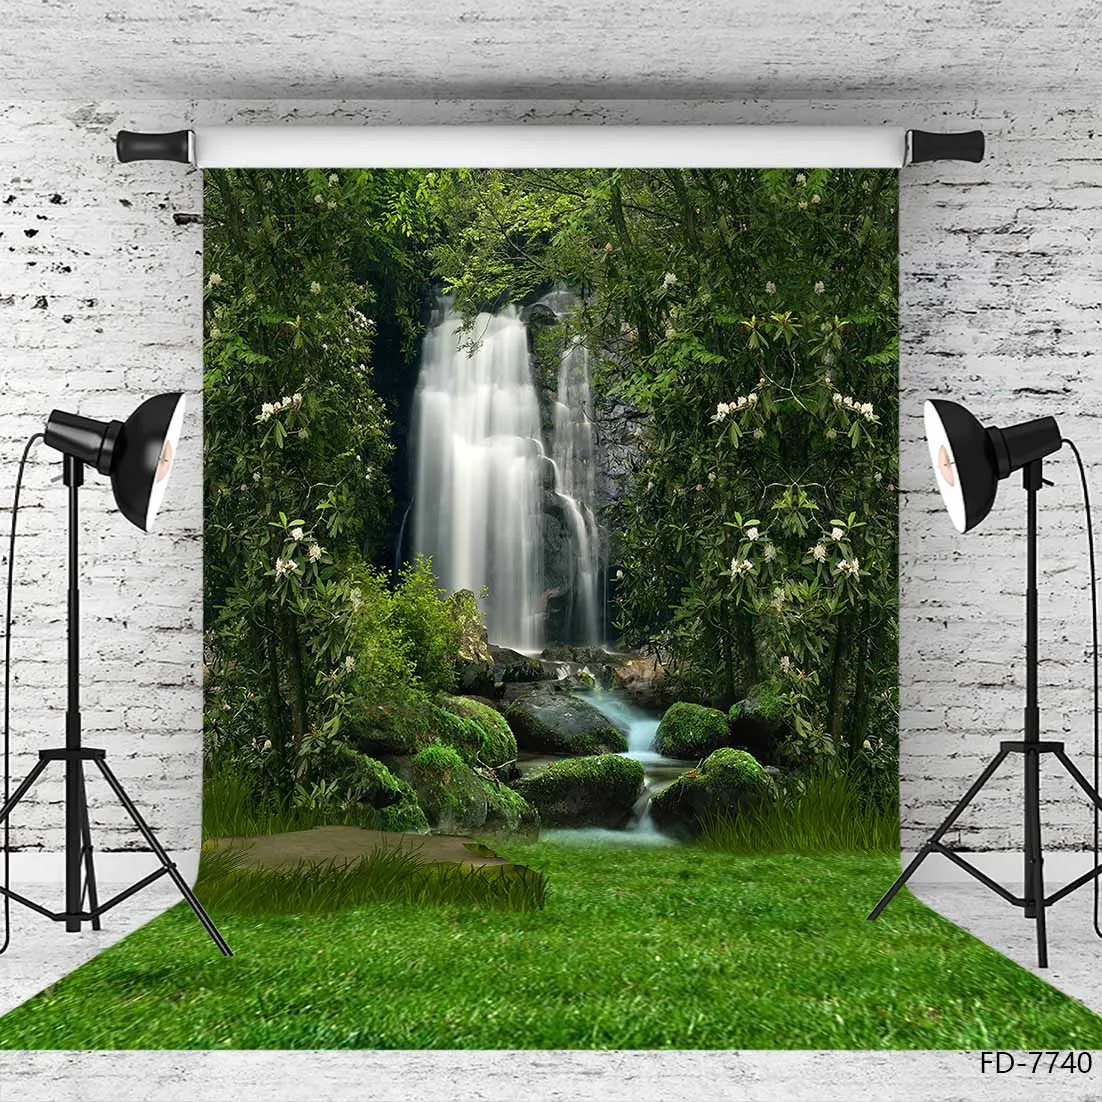 

Scenic Forest Waterfall Grassland Vinyl Photo Backgrounds for Studio Children Baby Portrait Photography Backdrops Photophone